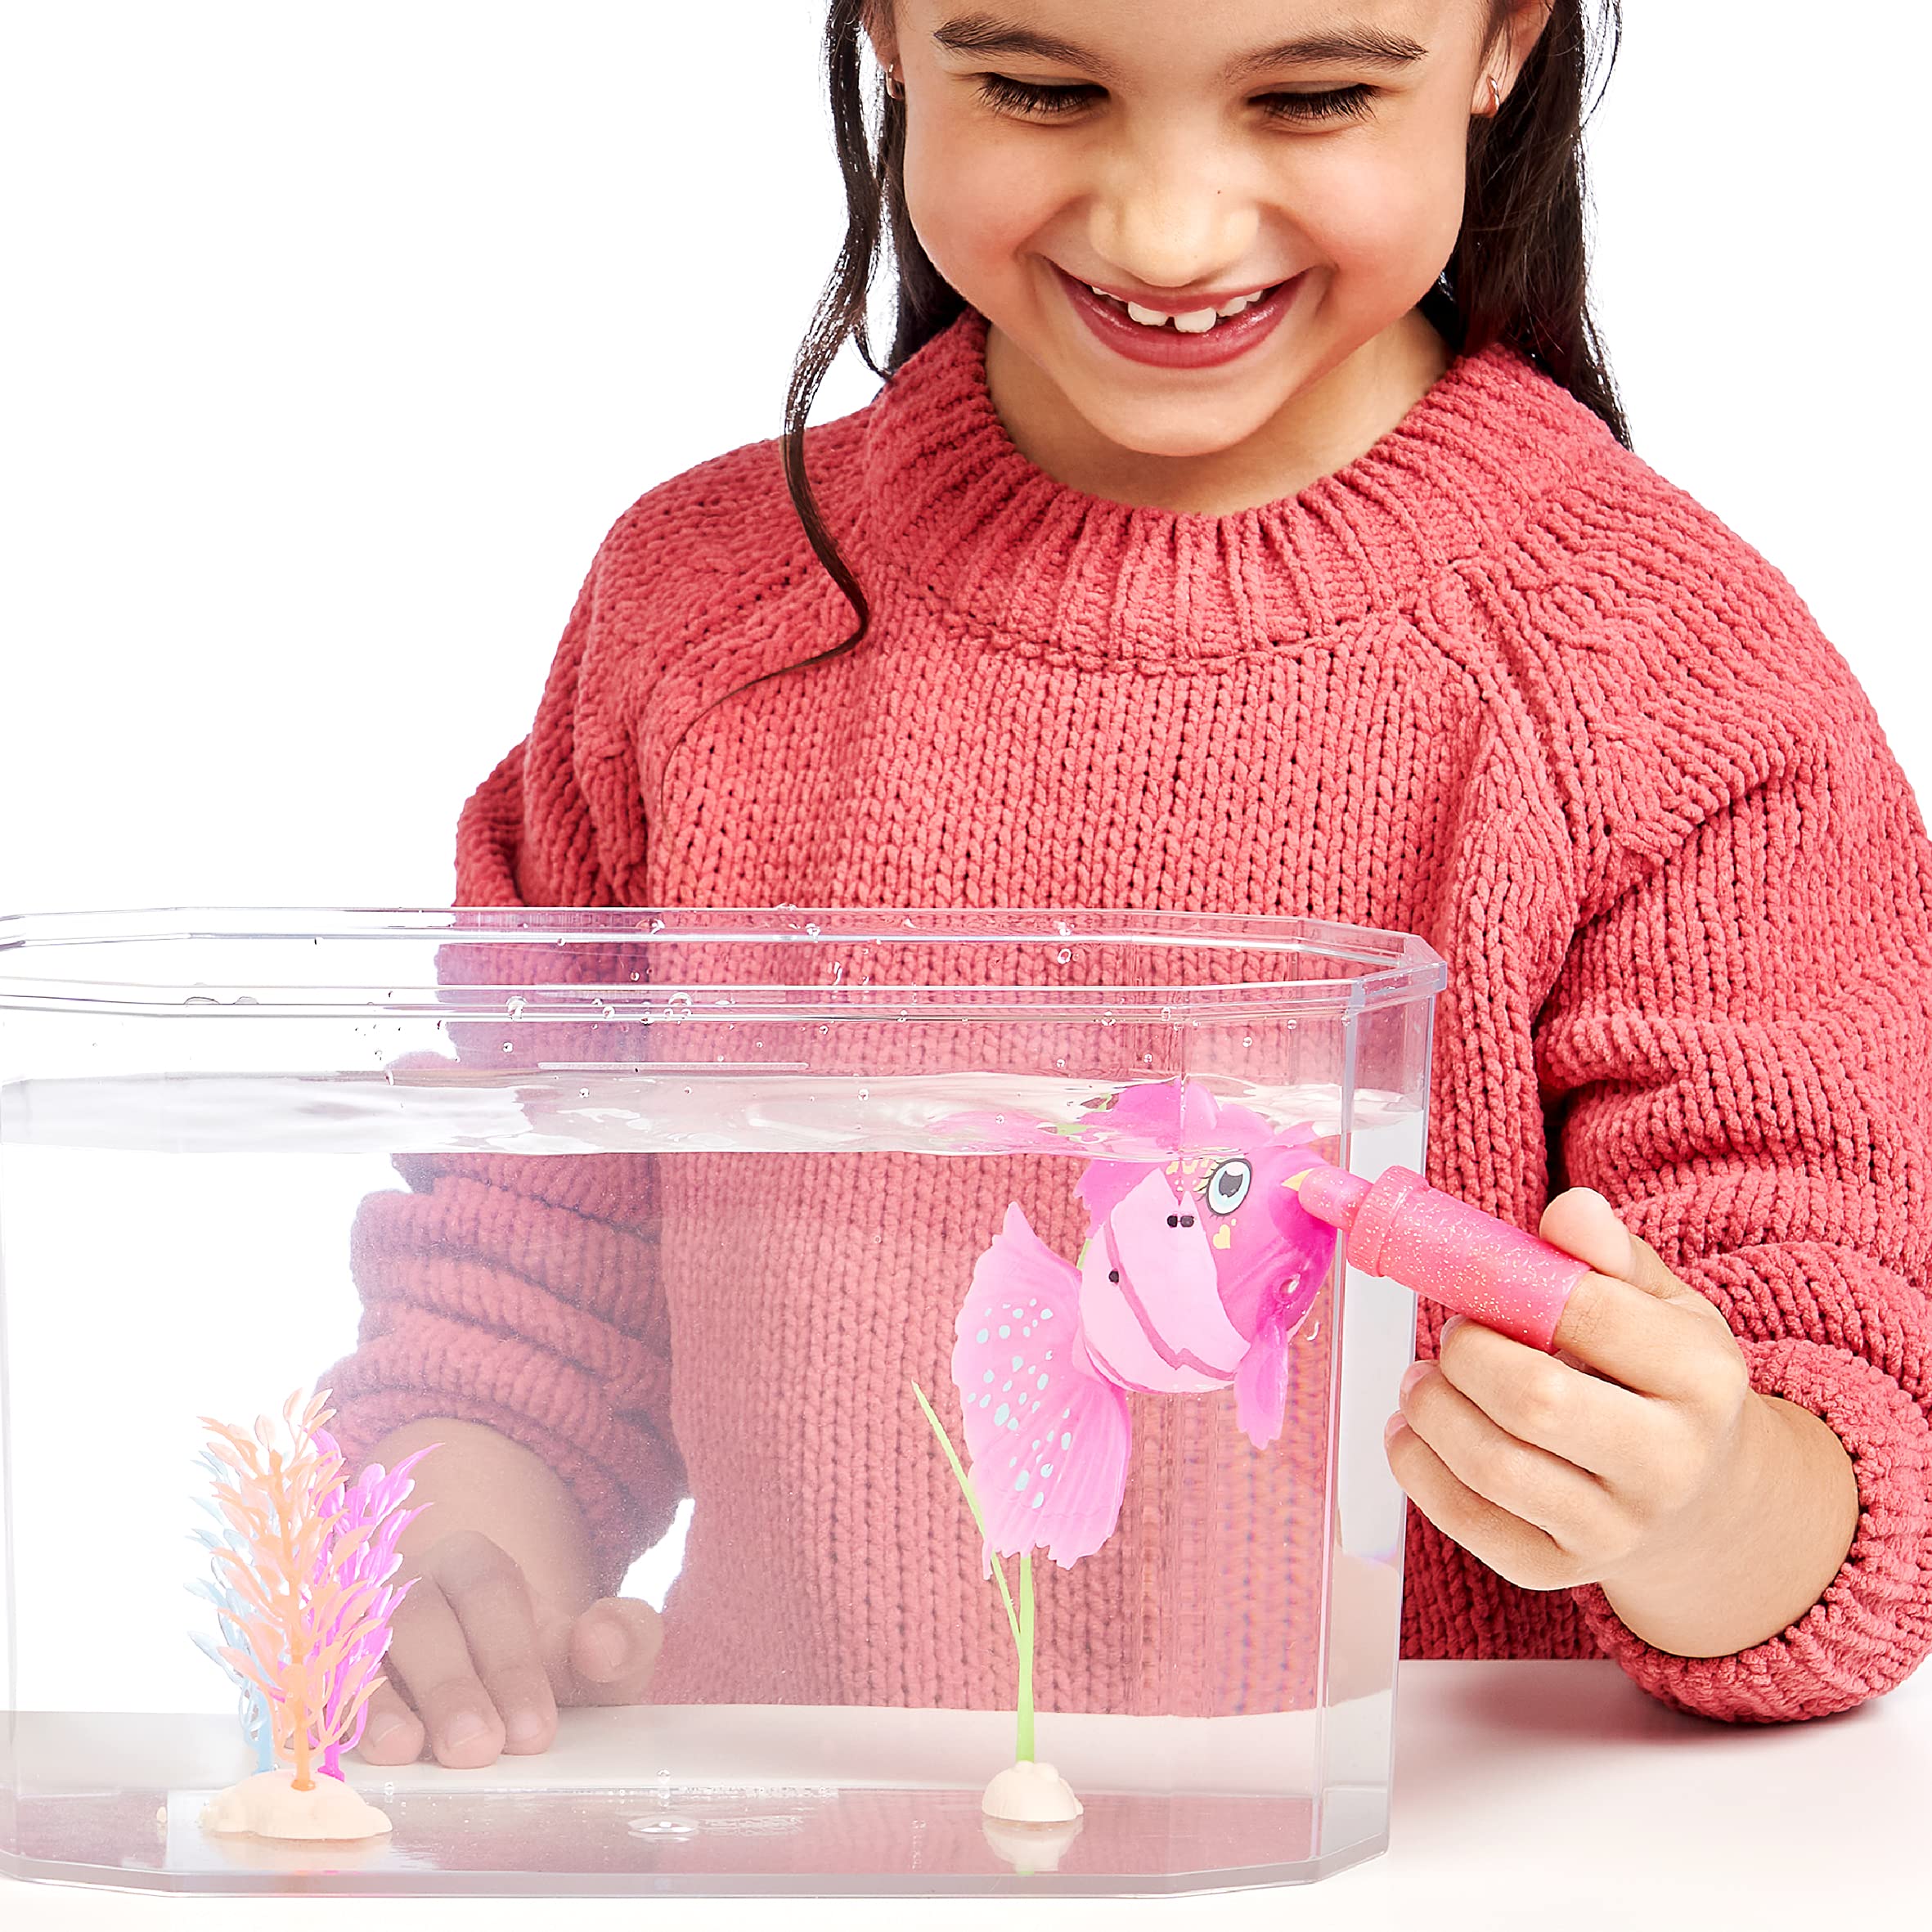 Little Live Pets - Lil' Dippers Fish Tank: Splasherina| Interactive Toy Fish & Tank, Magically Comes Alive in Water, Feed and Swims Like A Real Fish